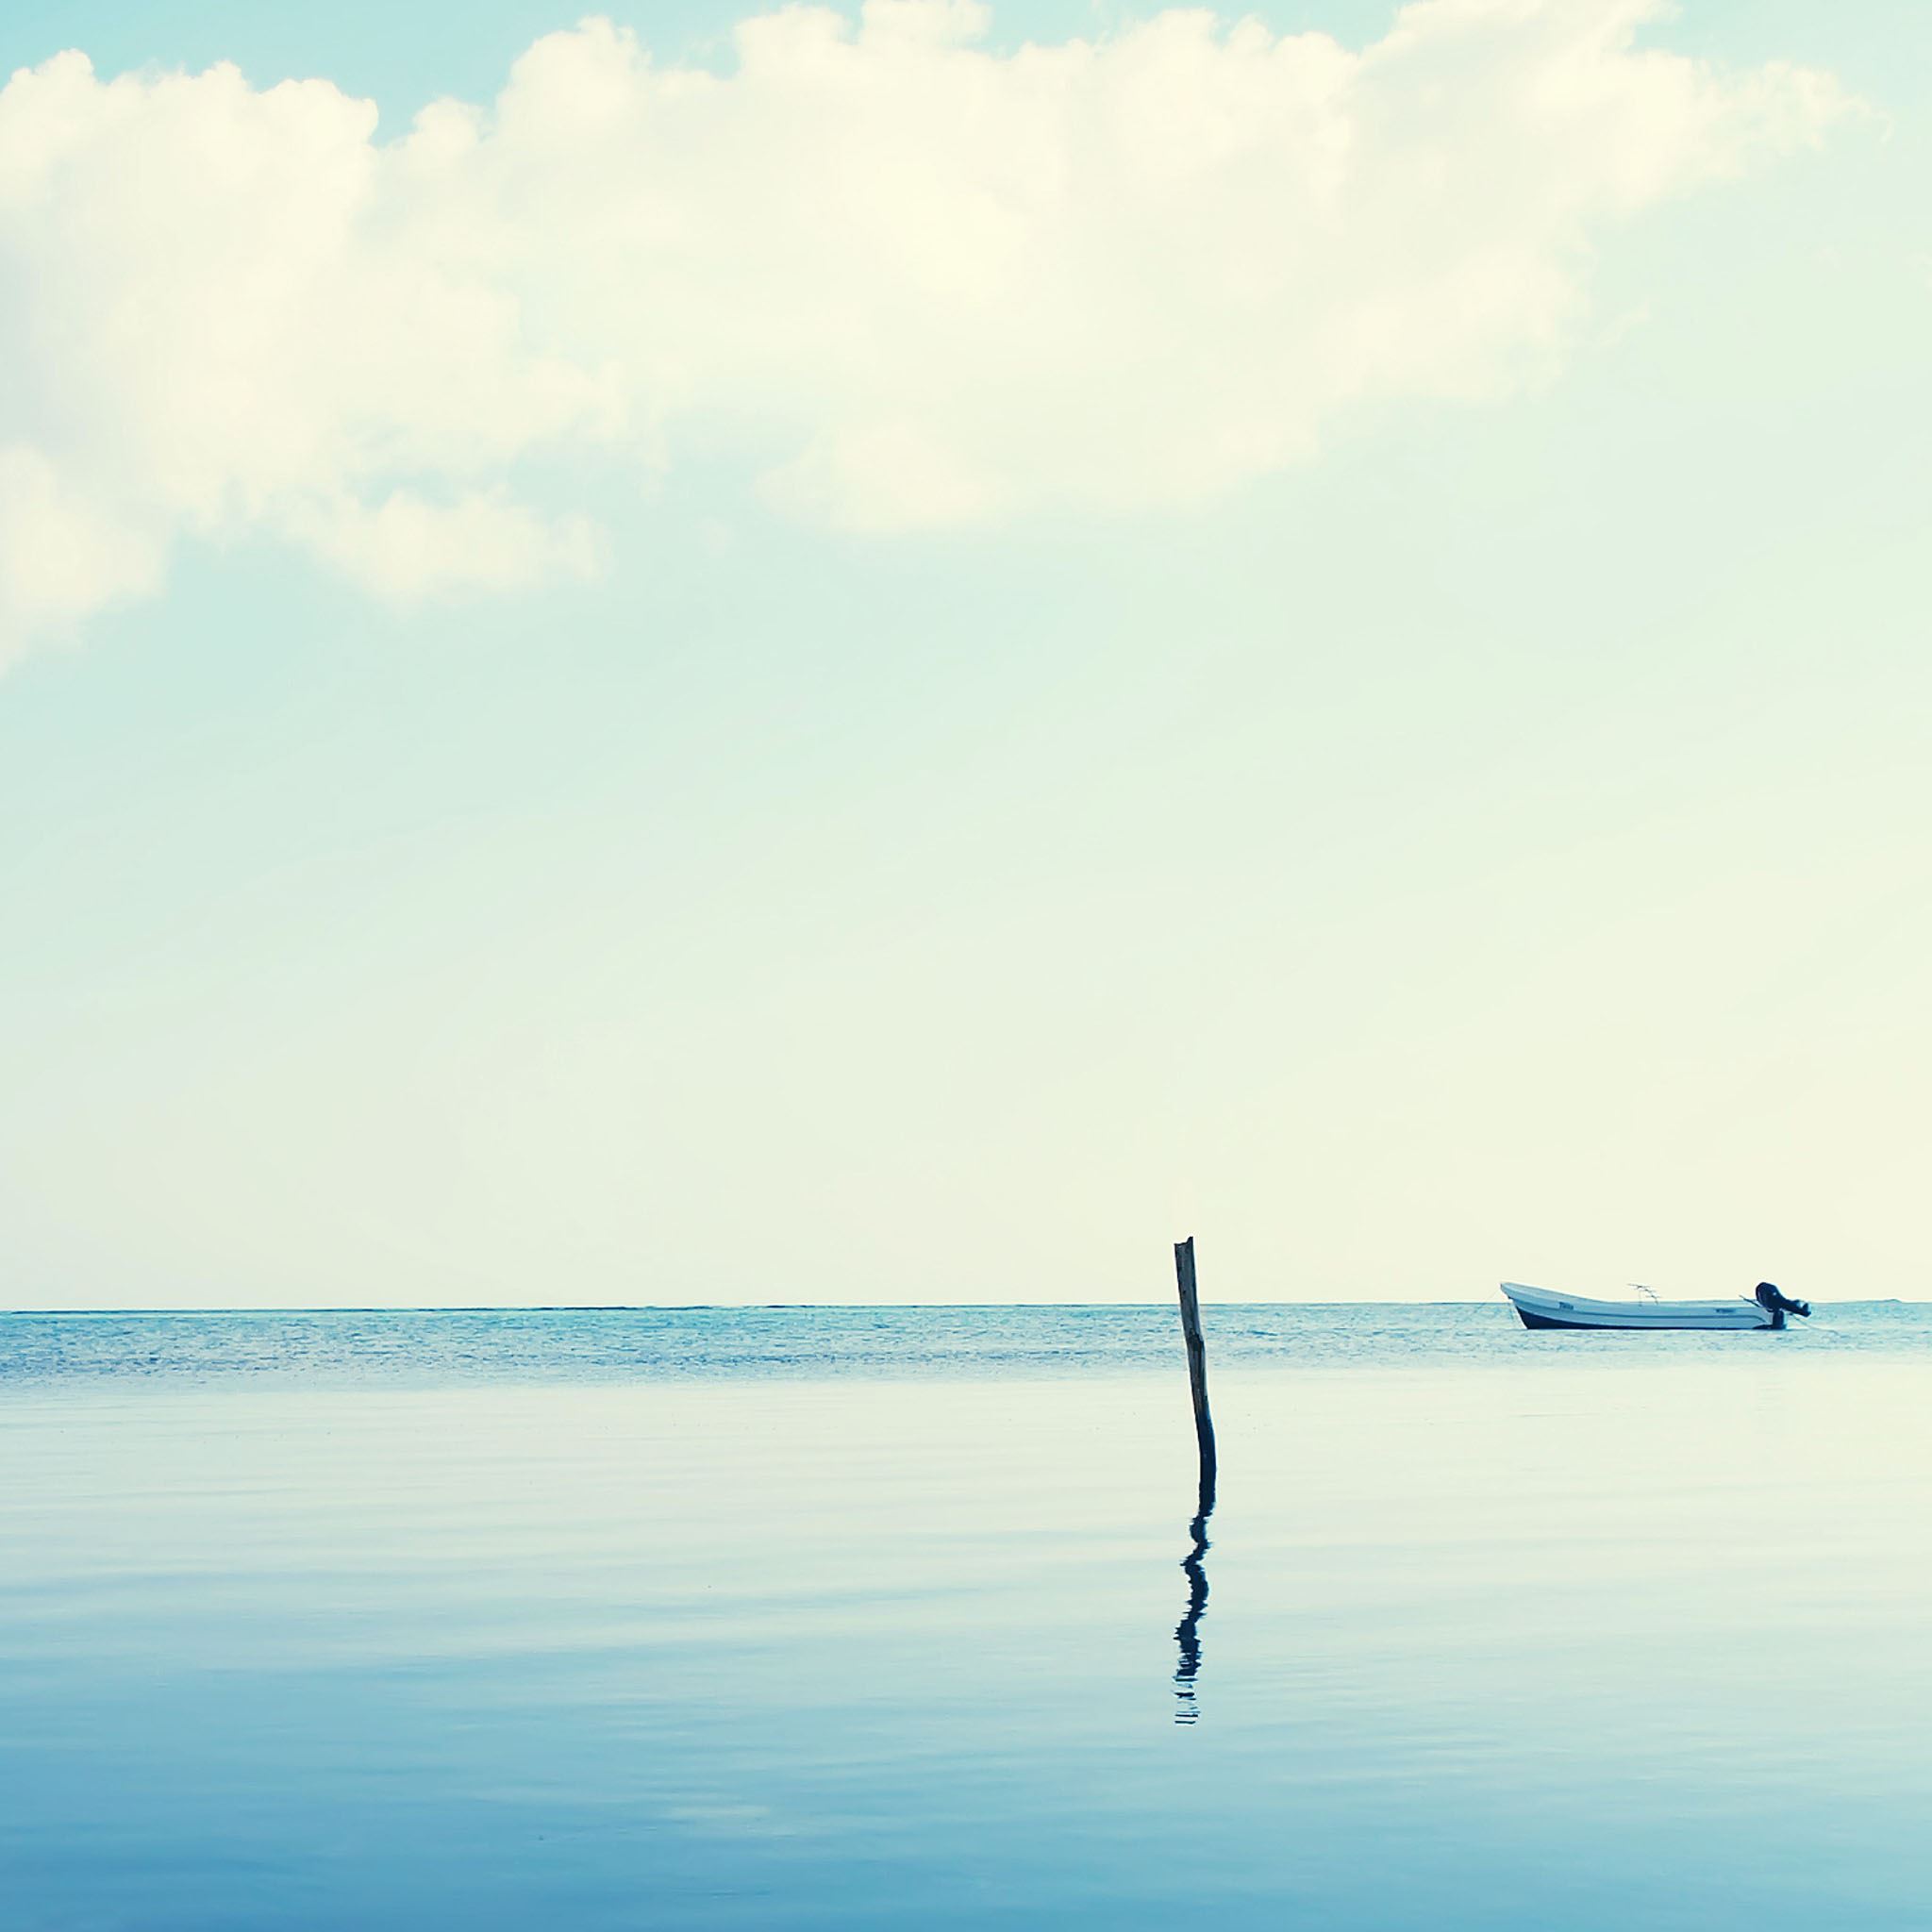 Nature Bright Peaceful Sea Skyline View Lonely Boat iPad Air Wallpapers  Free Download